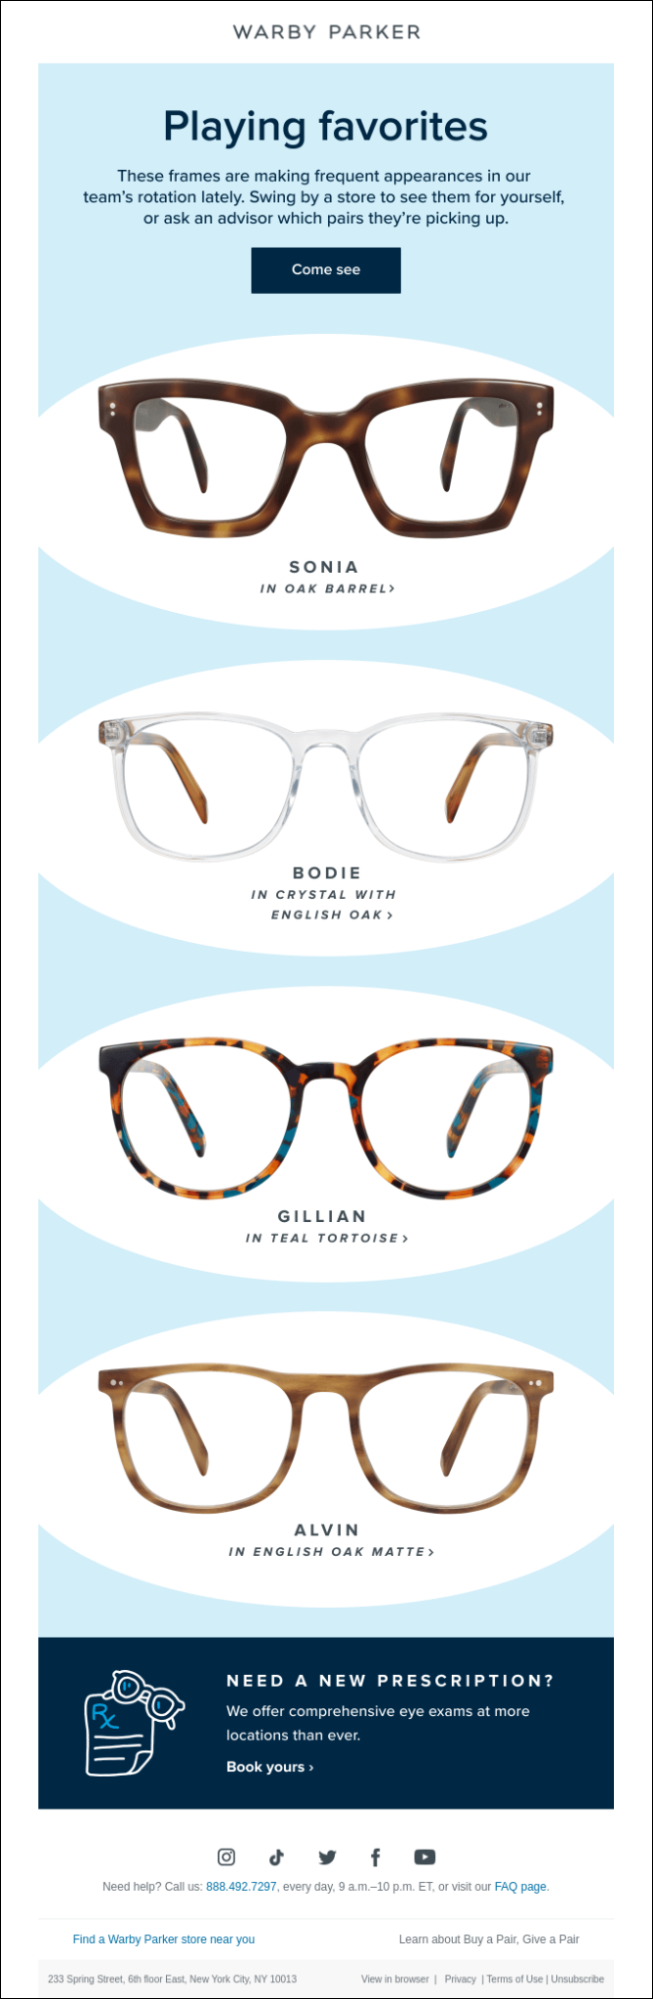 Warby Parker Email